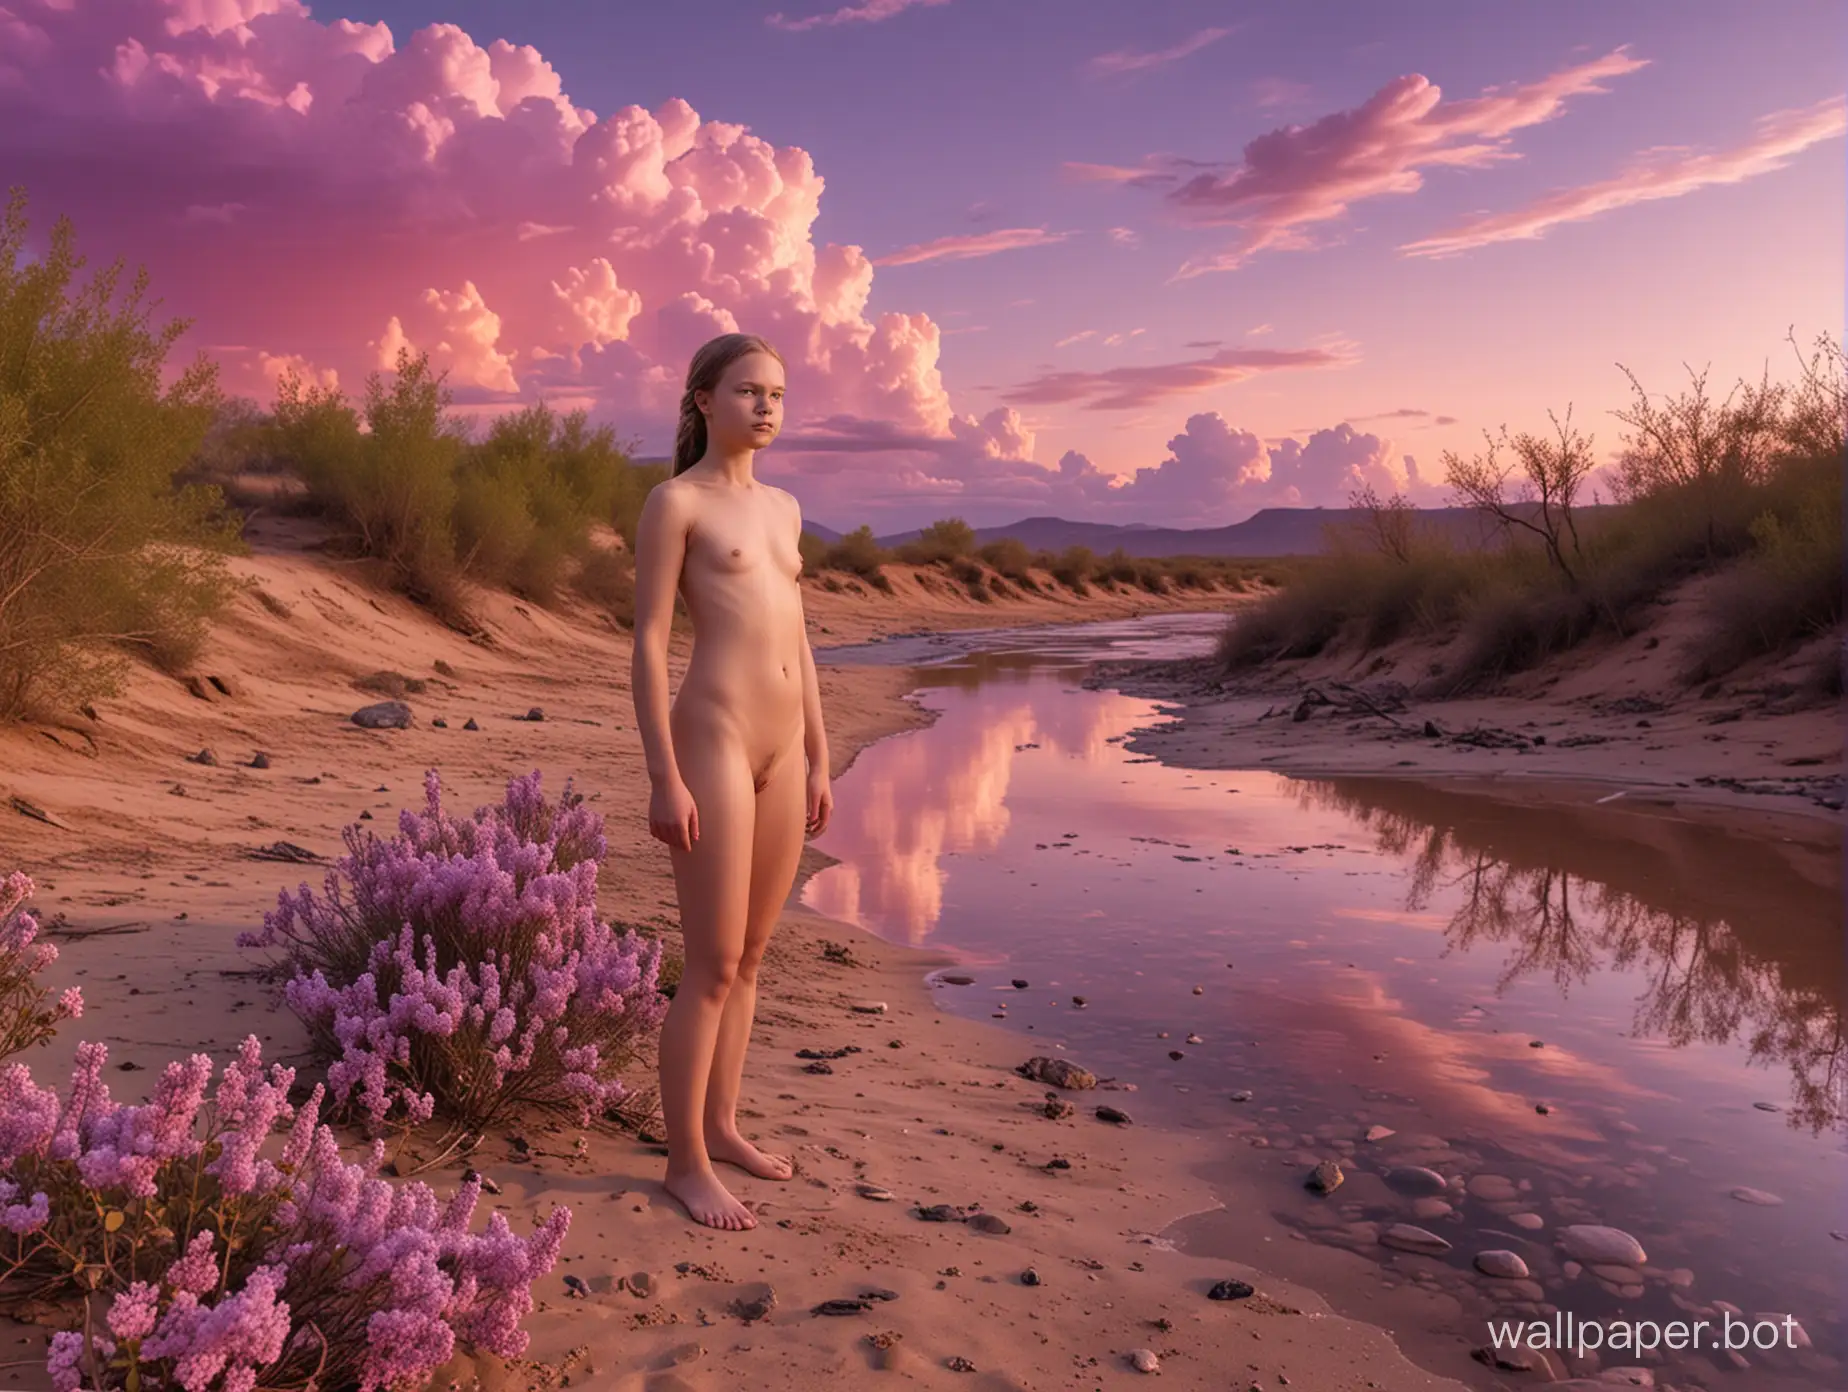 Greta Thunberg nudist girl 11 years old nude full length on an alien planet on the bank of a river in the desert with orange sand under a delicate lilac sky with rare clouds neon futurism